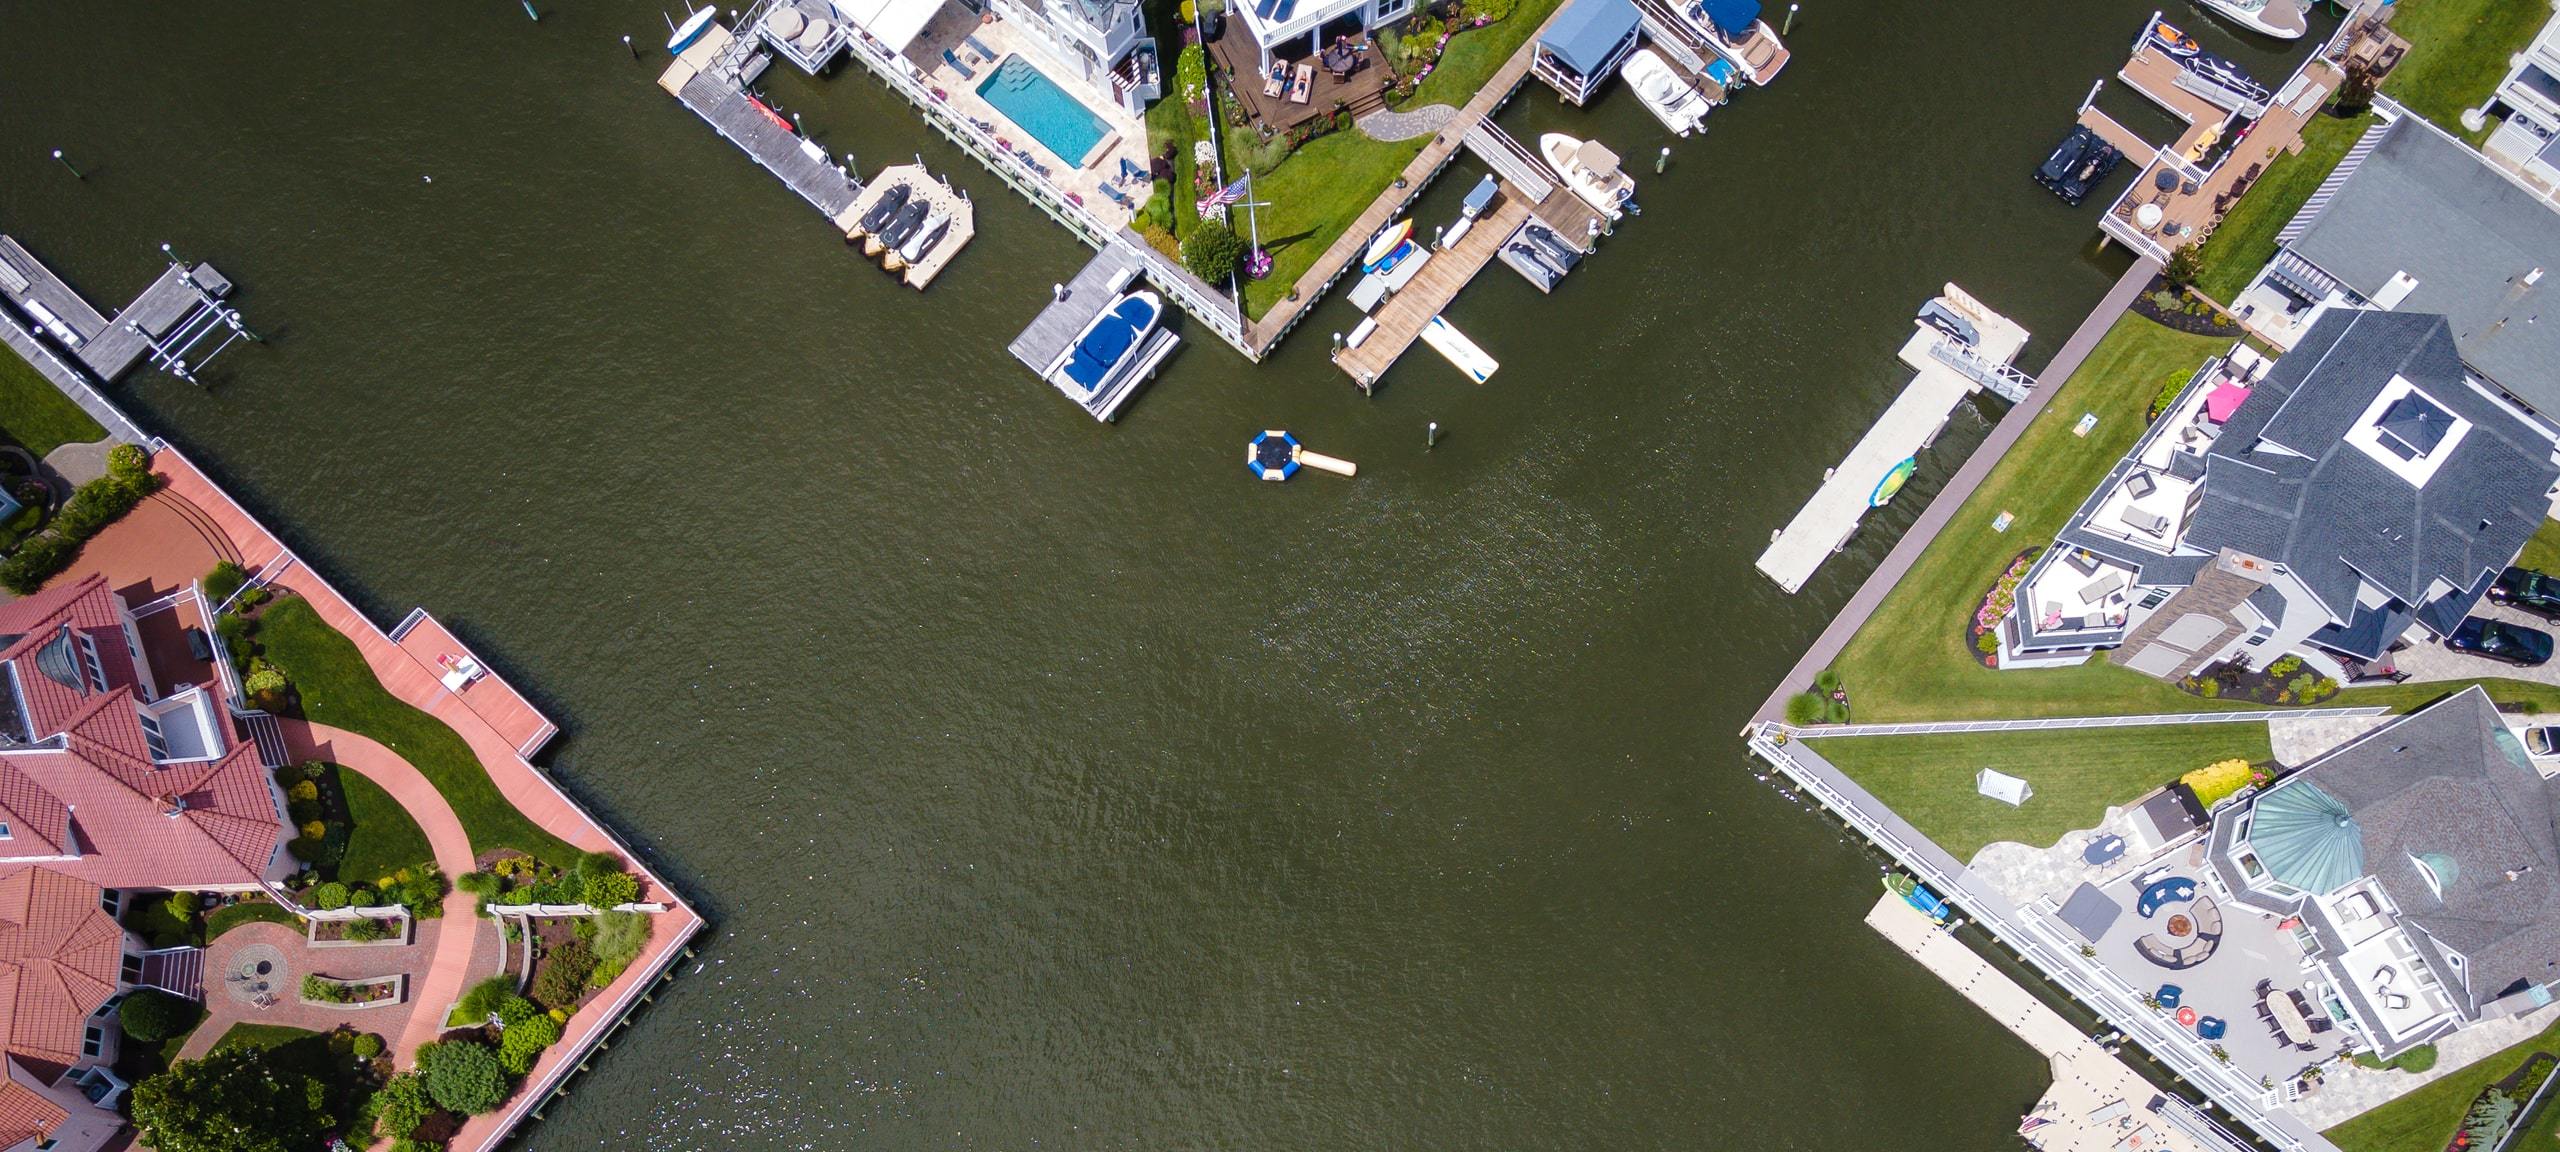 Aerial view of luxury waterfront real estate in Jersey Shore area, with private docks